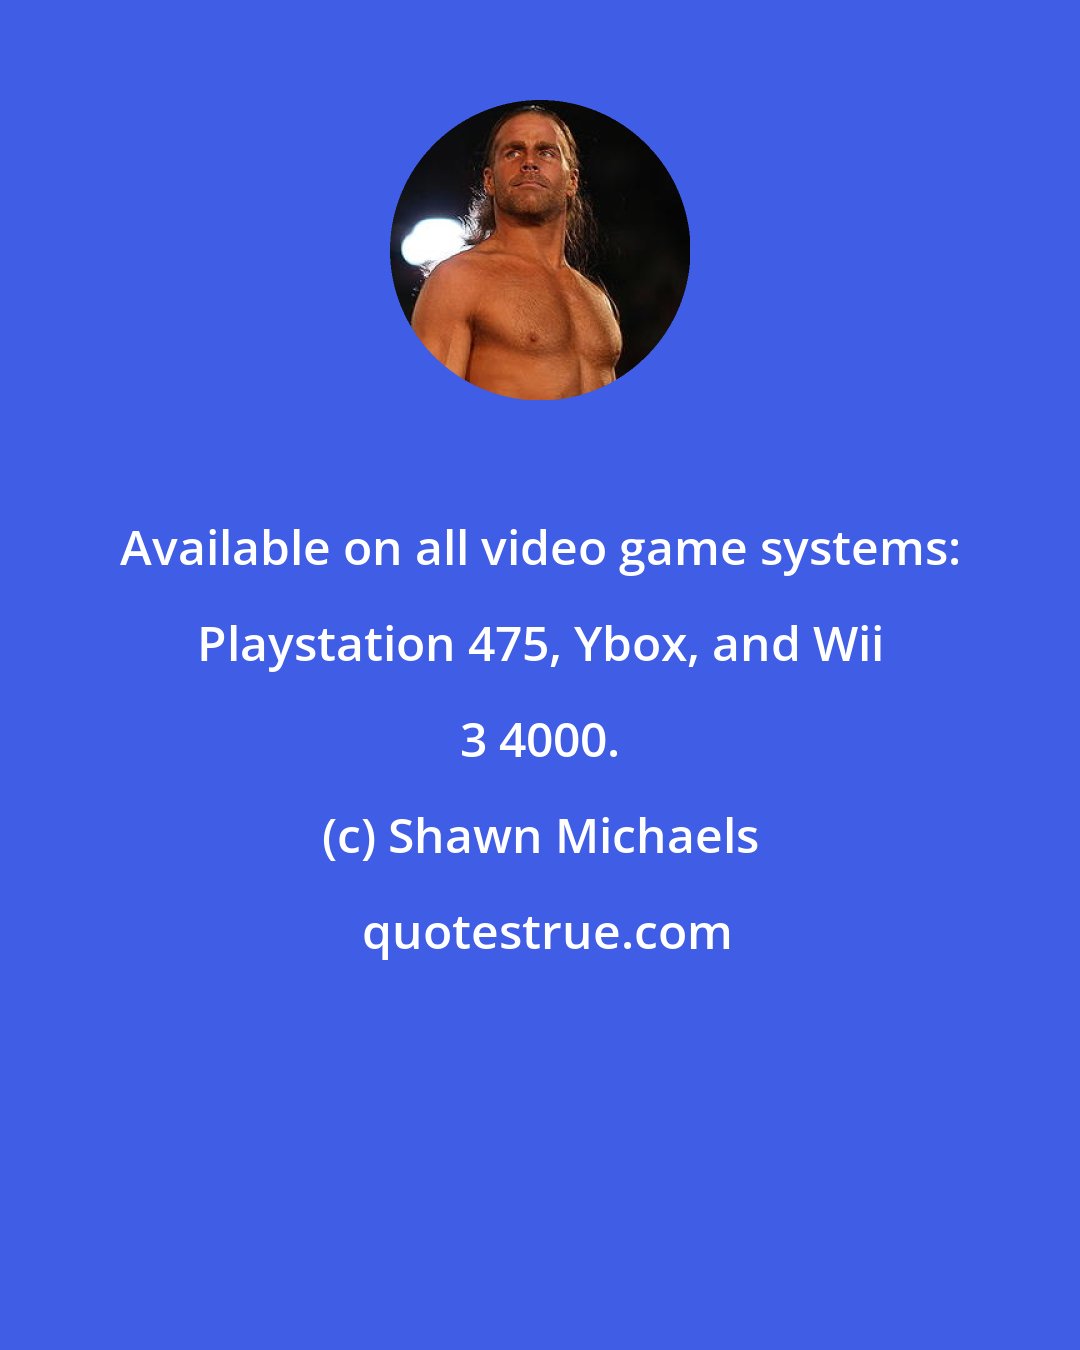 Shawn Michaels: Available on all video game systems: Playstation 475, Ybox, and Wii 3 4000.